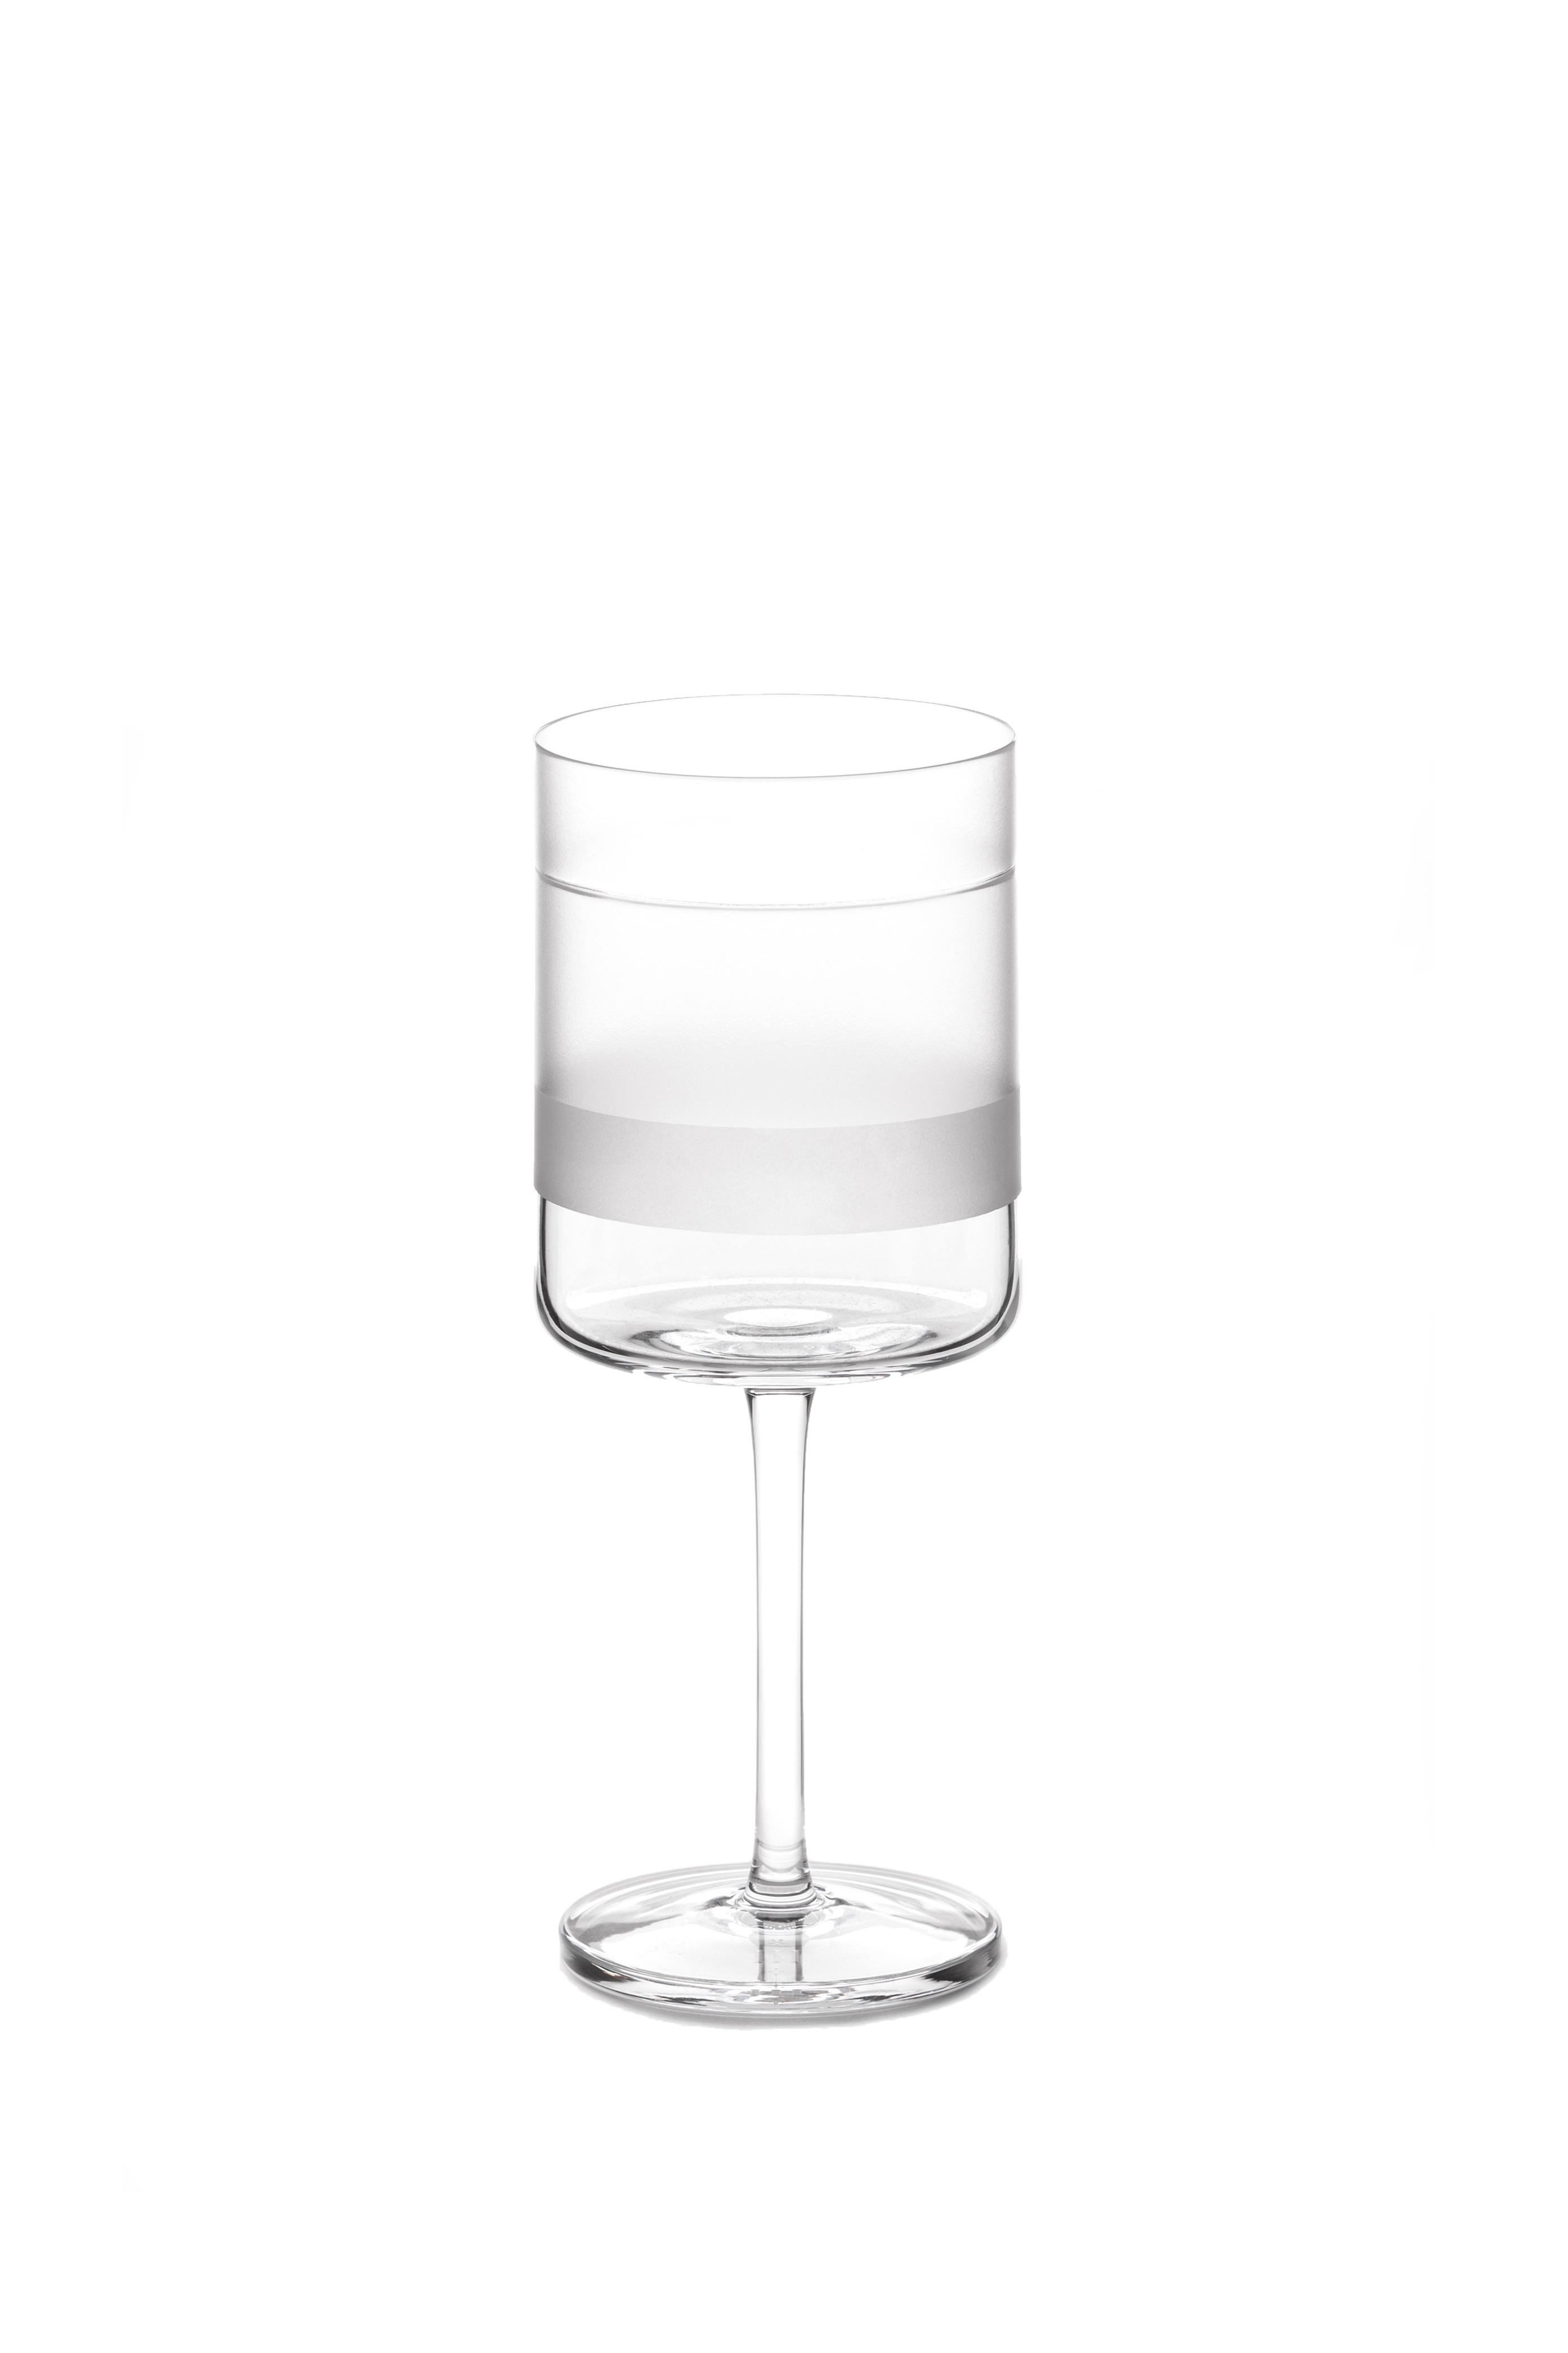 A red wine glass made by hand
A glass designed by Scholten & Baijings as part of our 'ELEMENTS' series.

The Collection: Elements
A depth of graphic markings defines the ELEMENTS series of lead crystal. Cuts and textures of varying depth and